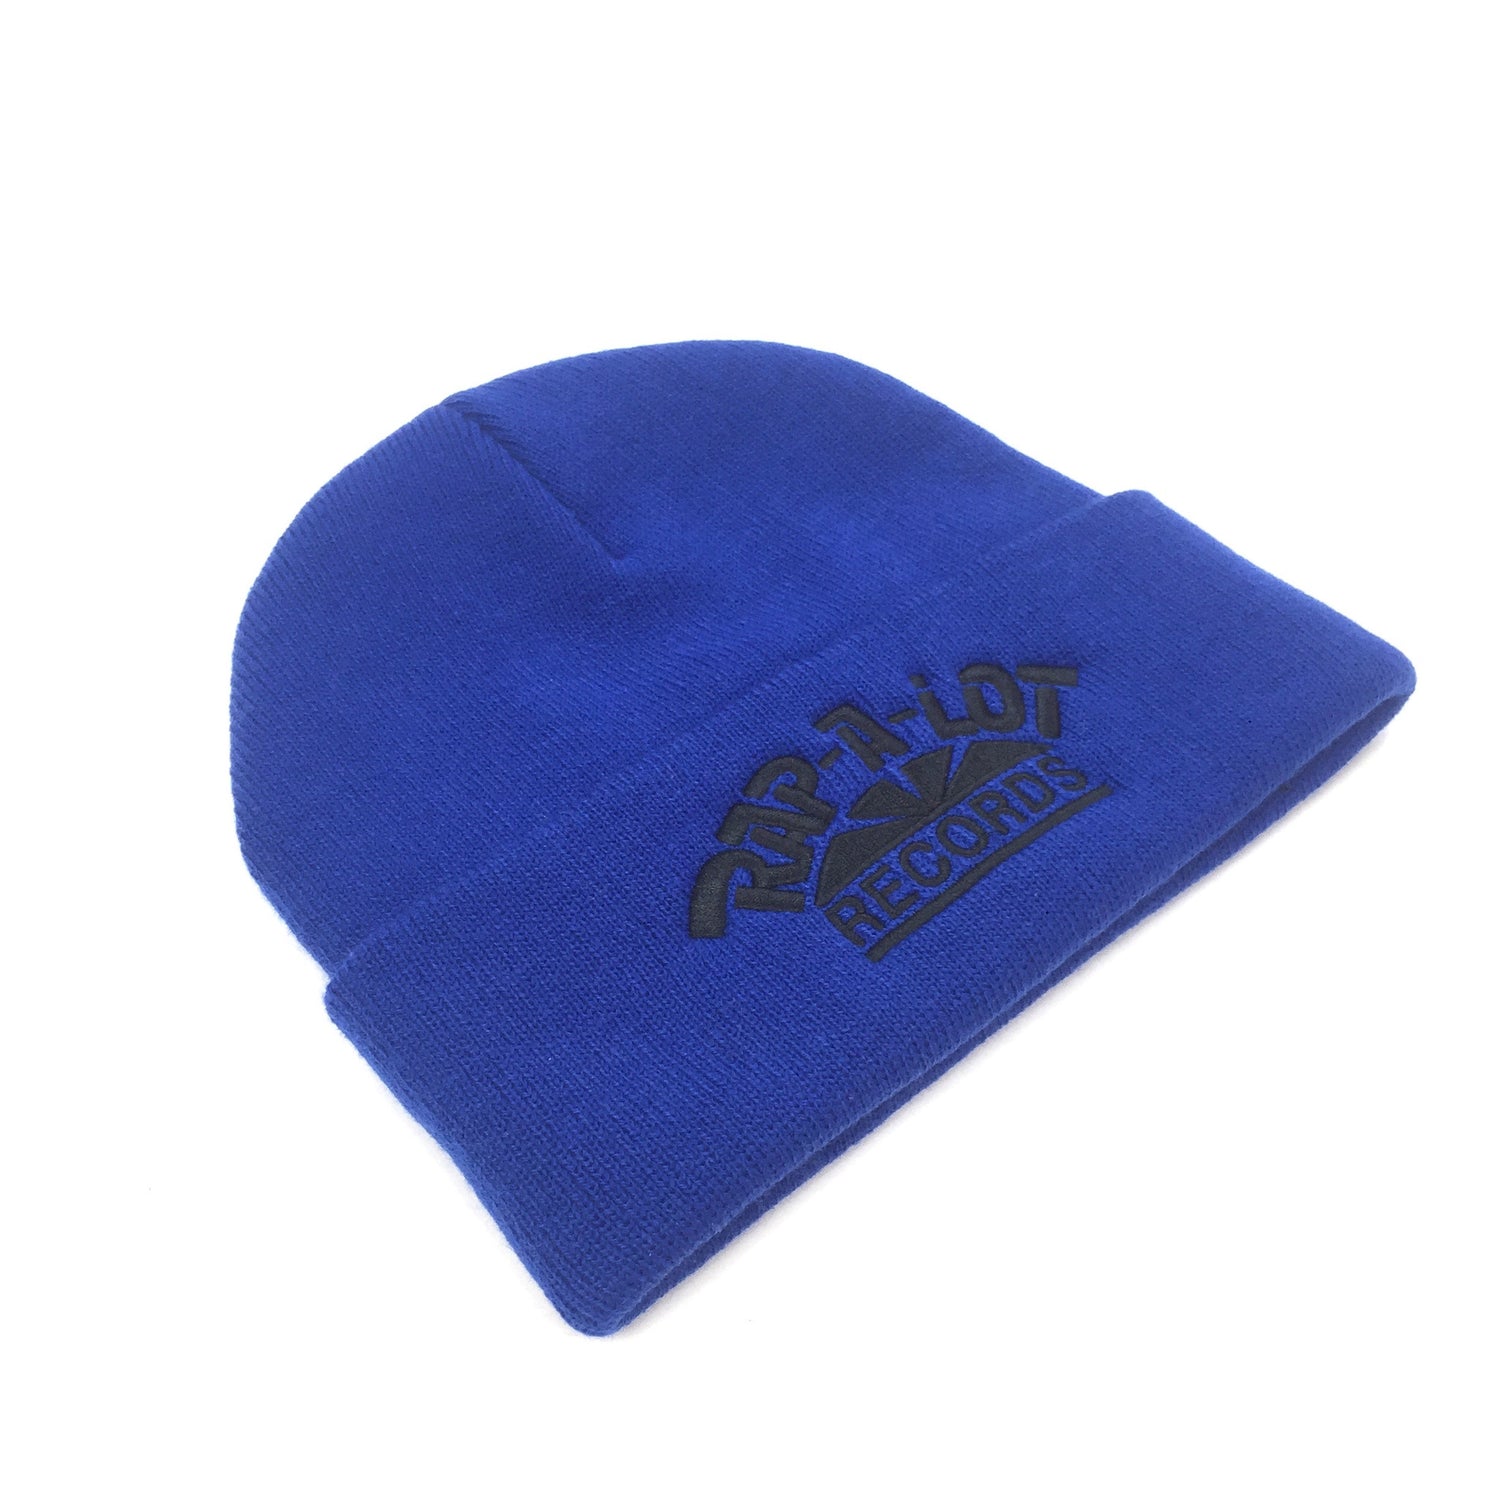 Supreme x Rap-A-Lot Records - Blue Logo Embroidered Beanie Hat